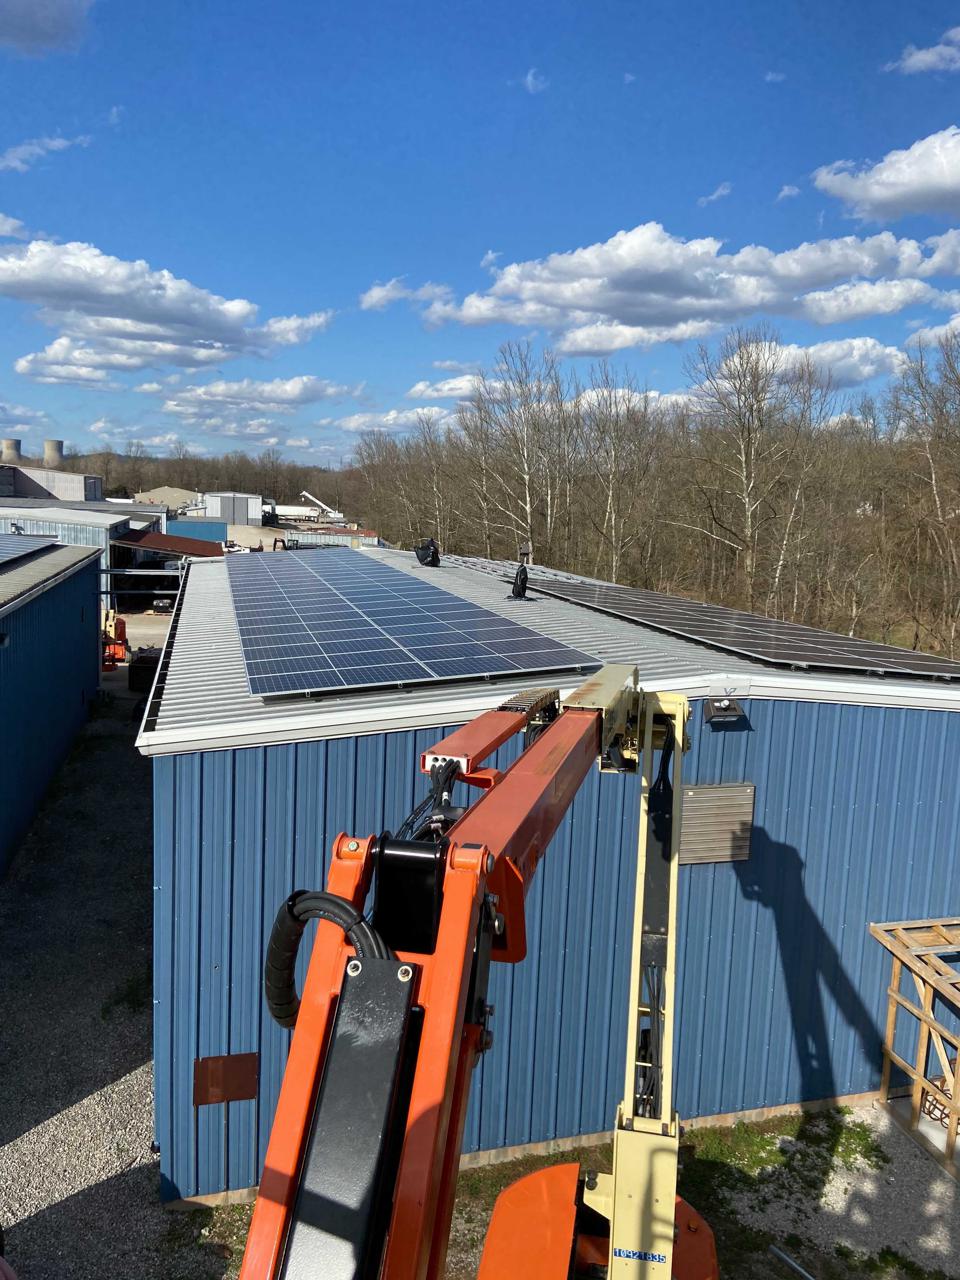 Solar Panels are being placed on the facility of Nitro Construction Services in West Virginia. REVOLT ENERGY